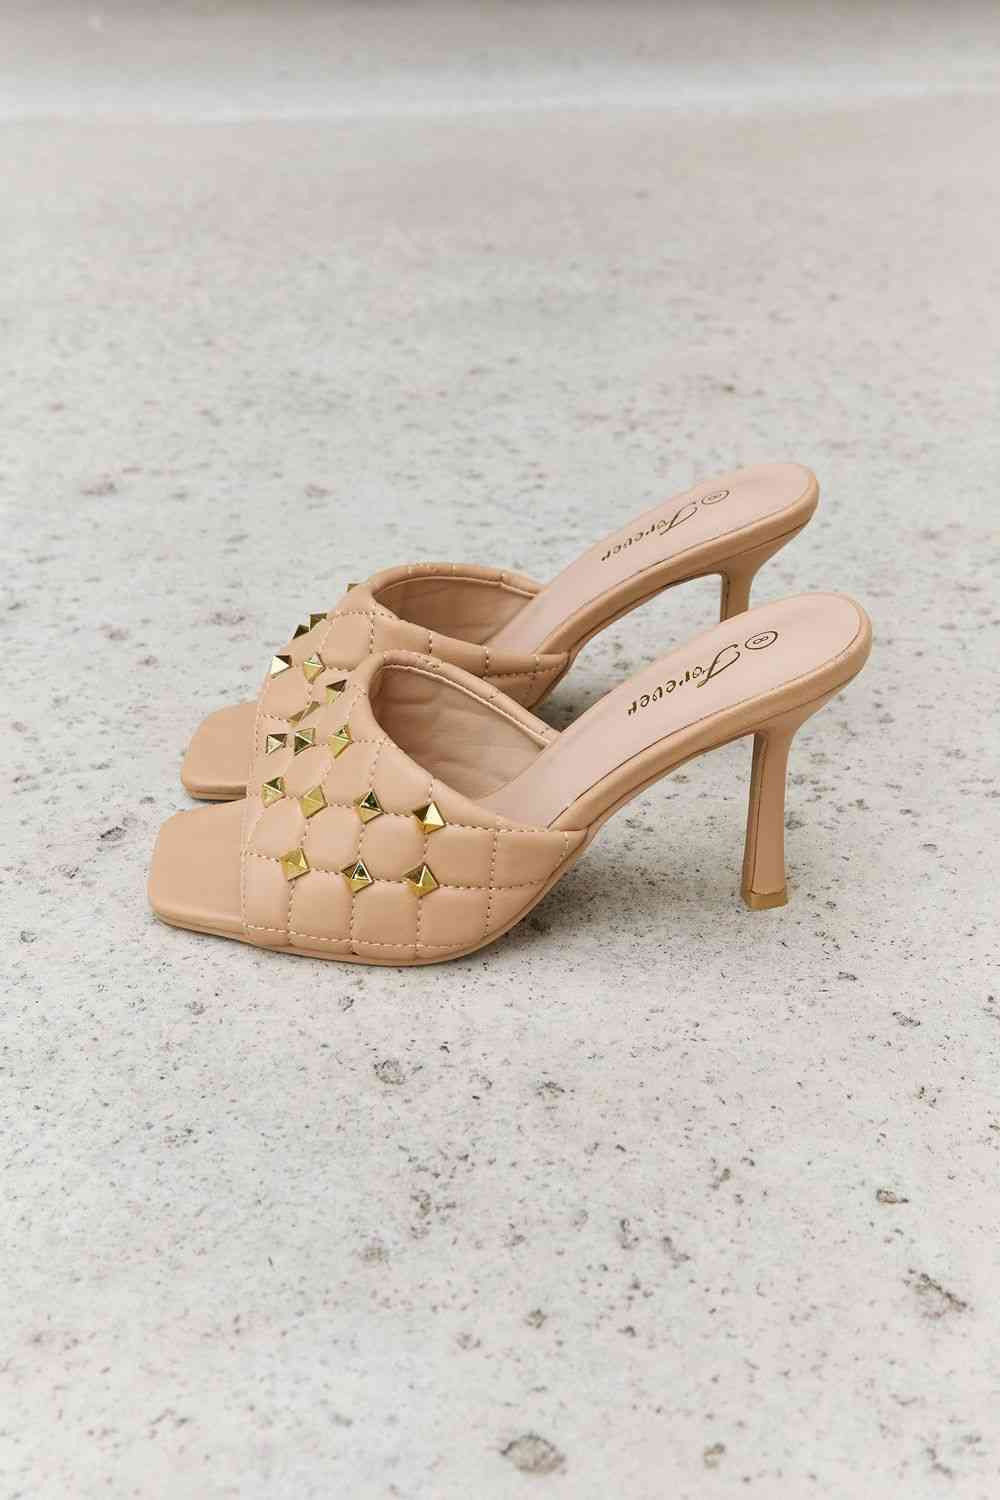 Square Toe Quilted Mule Heels in Nude - Accessories - Shoes - 8 - 2024